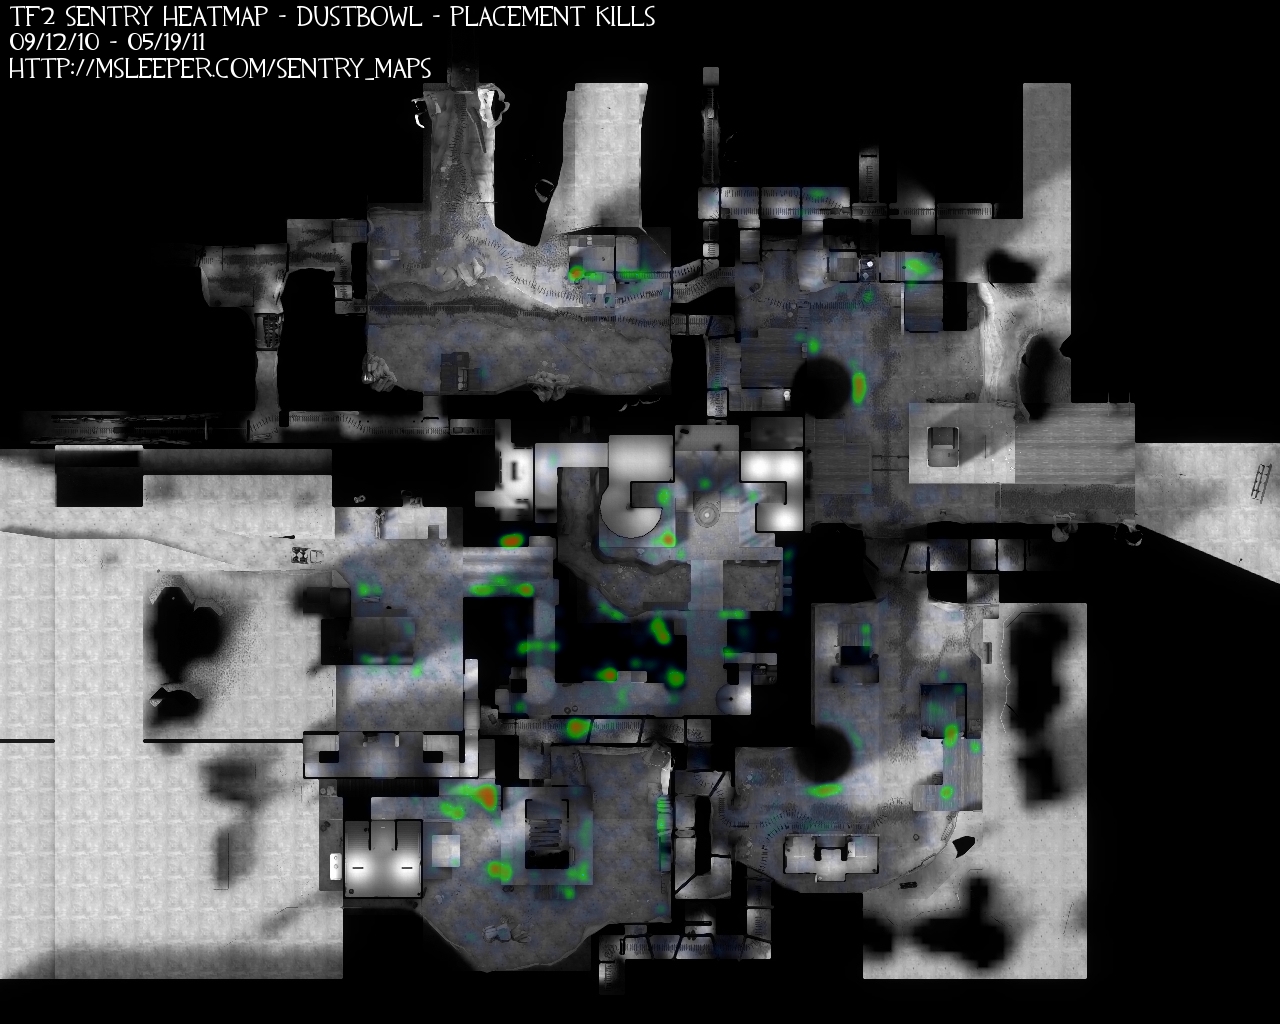 The Dustbowl Sentry Kill/Placement Heatmap 